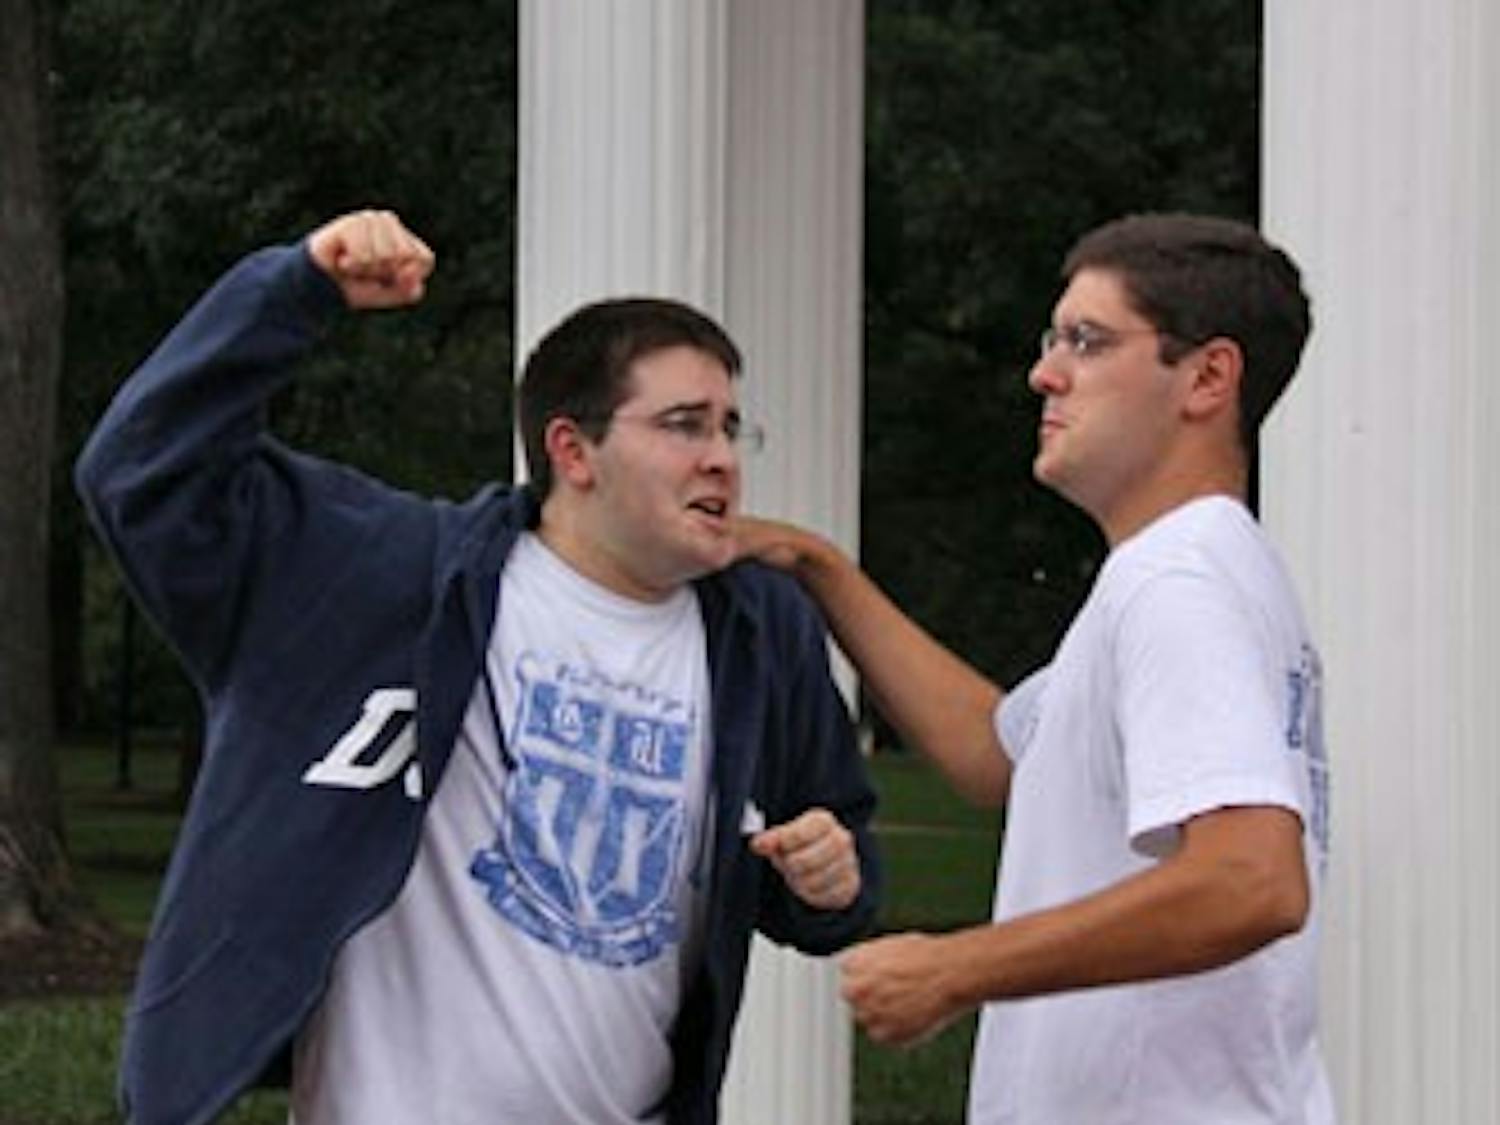 Alex Klein, left, and Mike Santangelo, long-time best friends, illustrate their allegiances to their opposing alma maters.